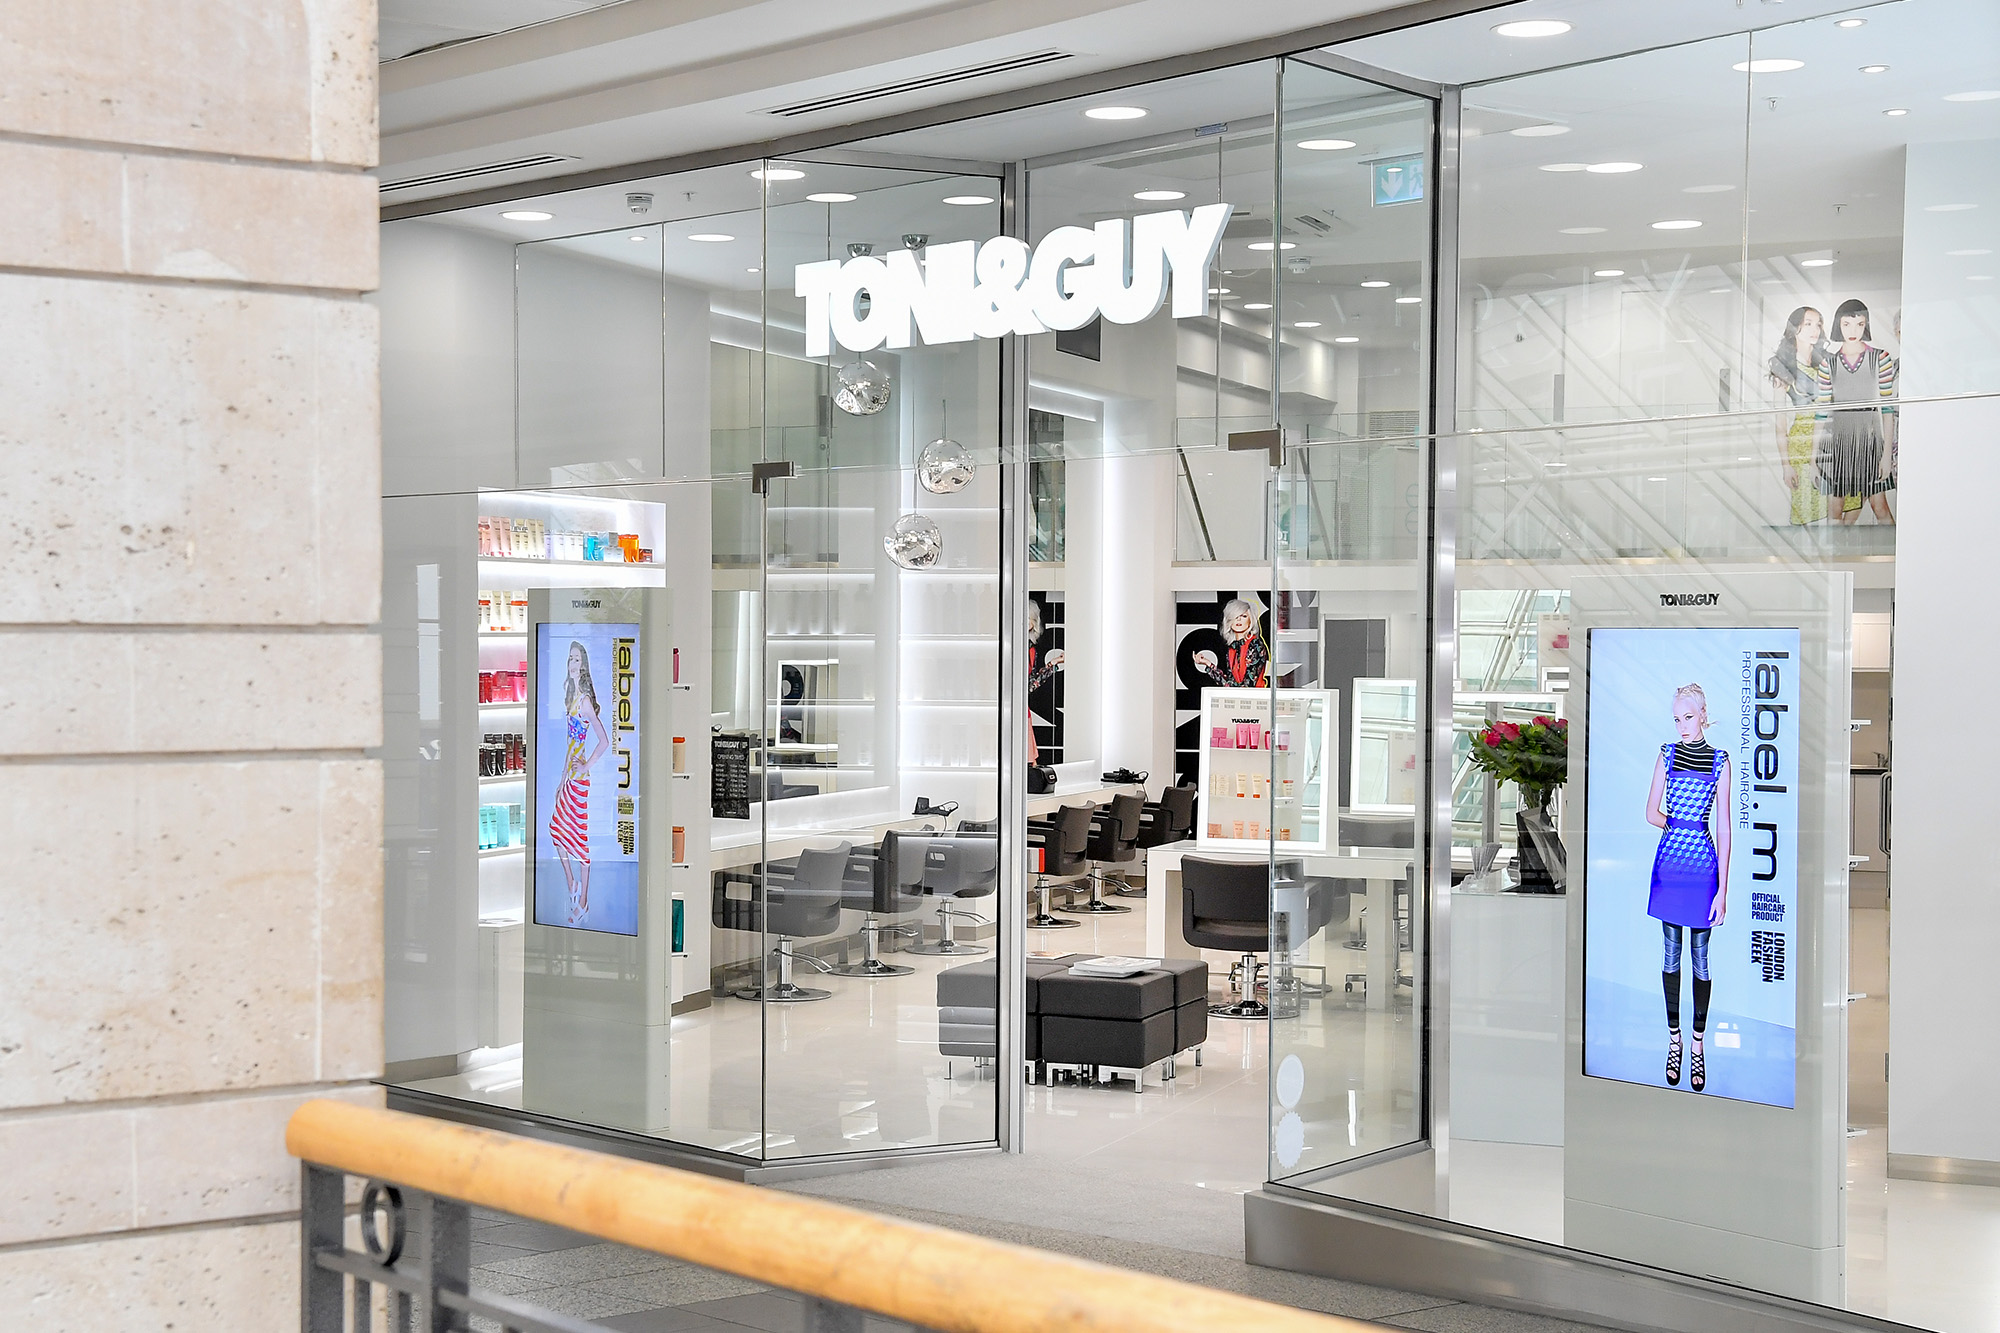 Premier Interior Systems - Toni and Guy - Bespoke Interior Fit Out